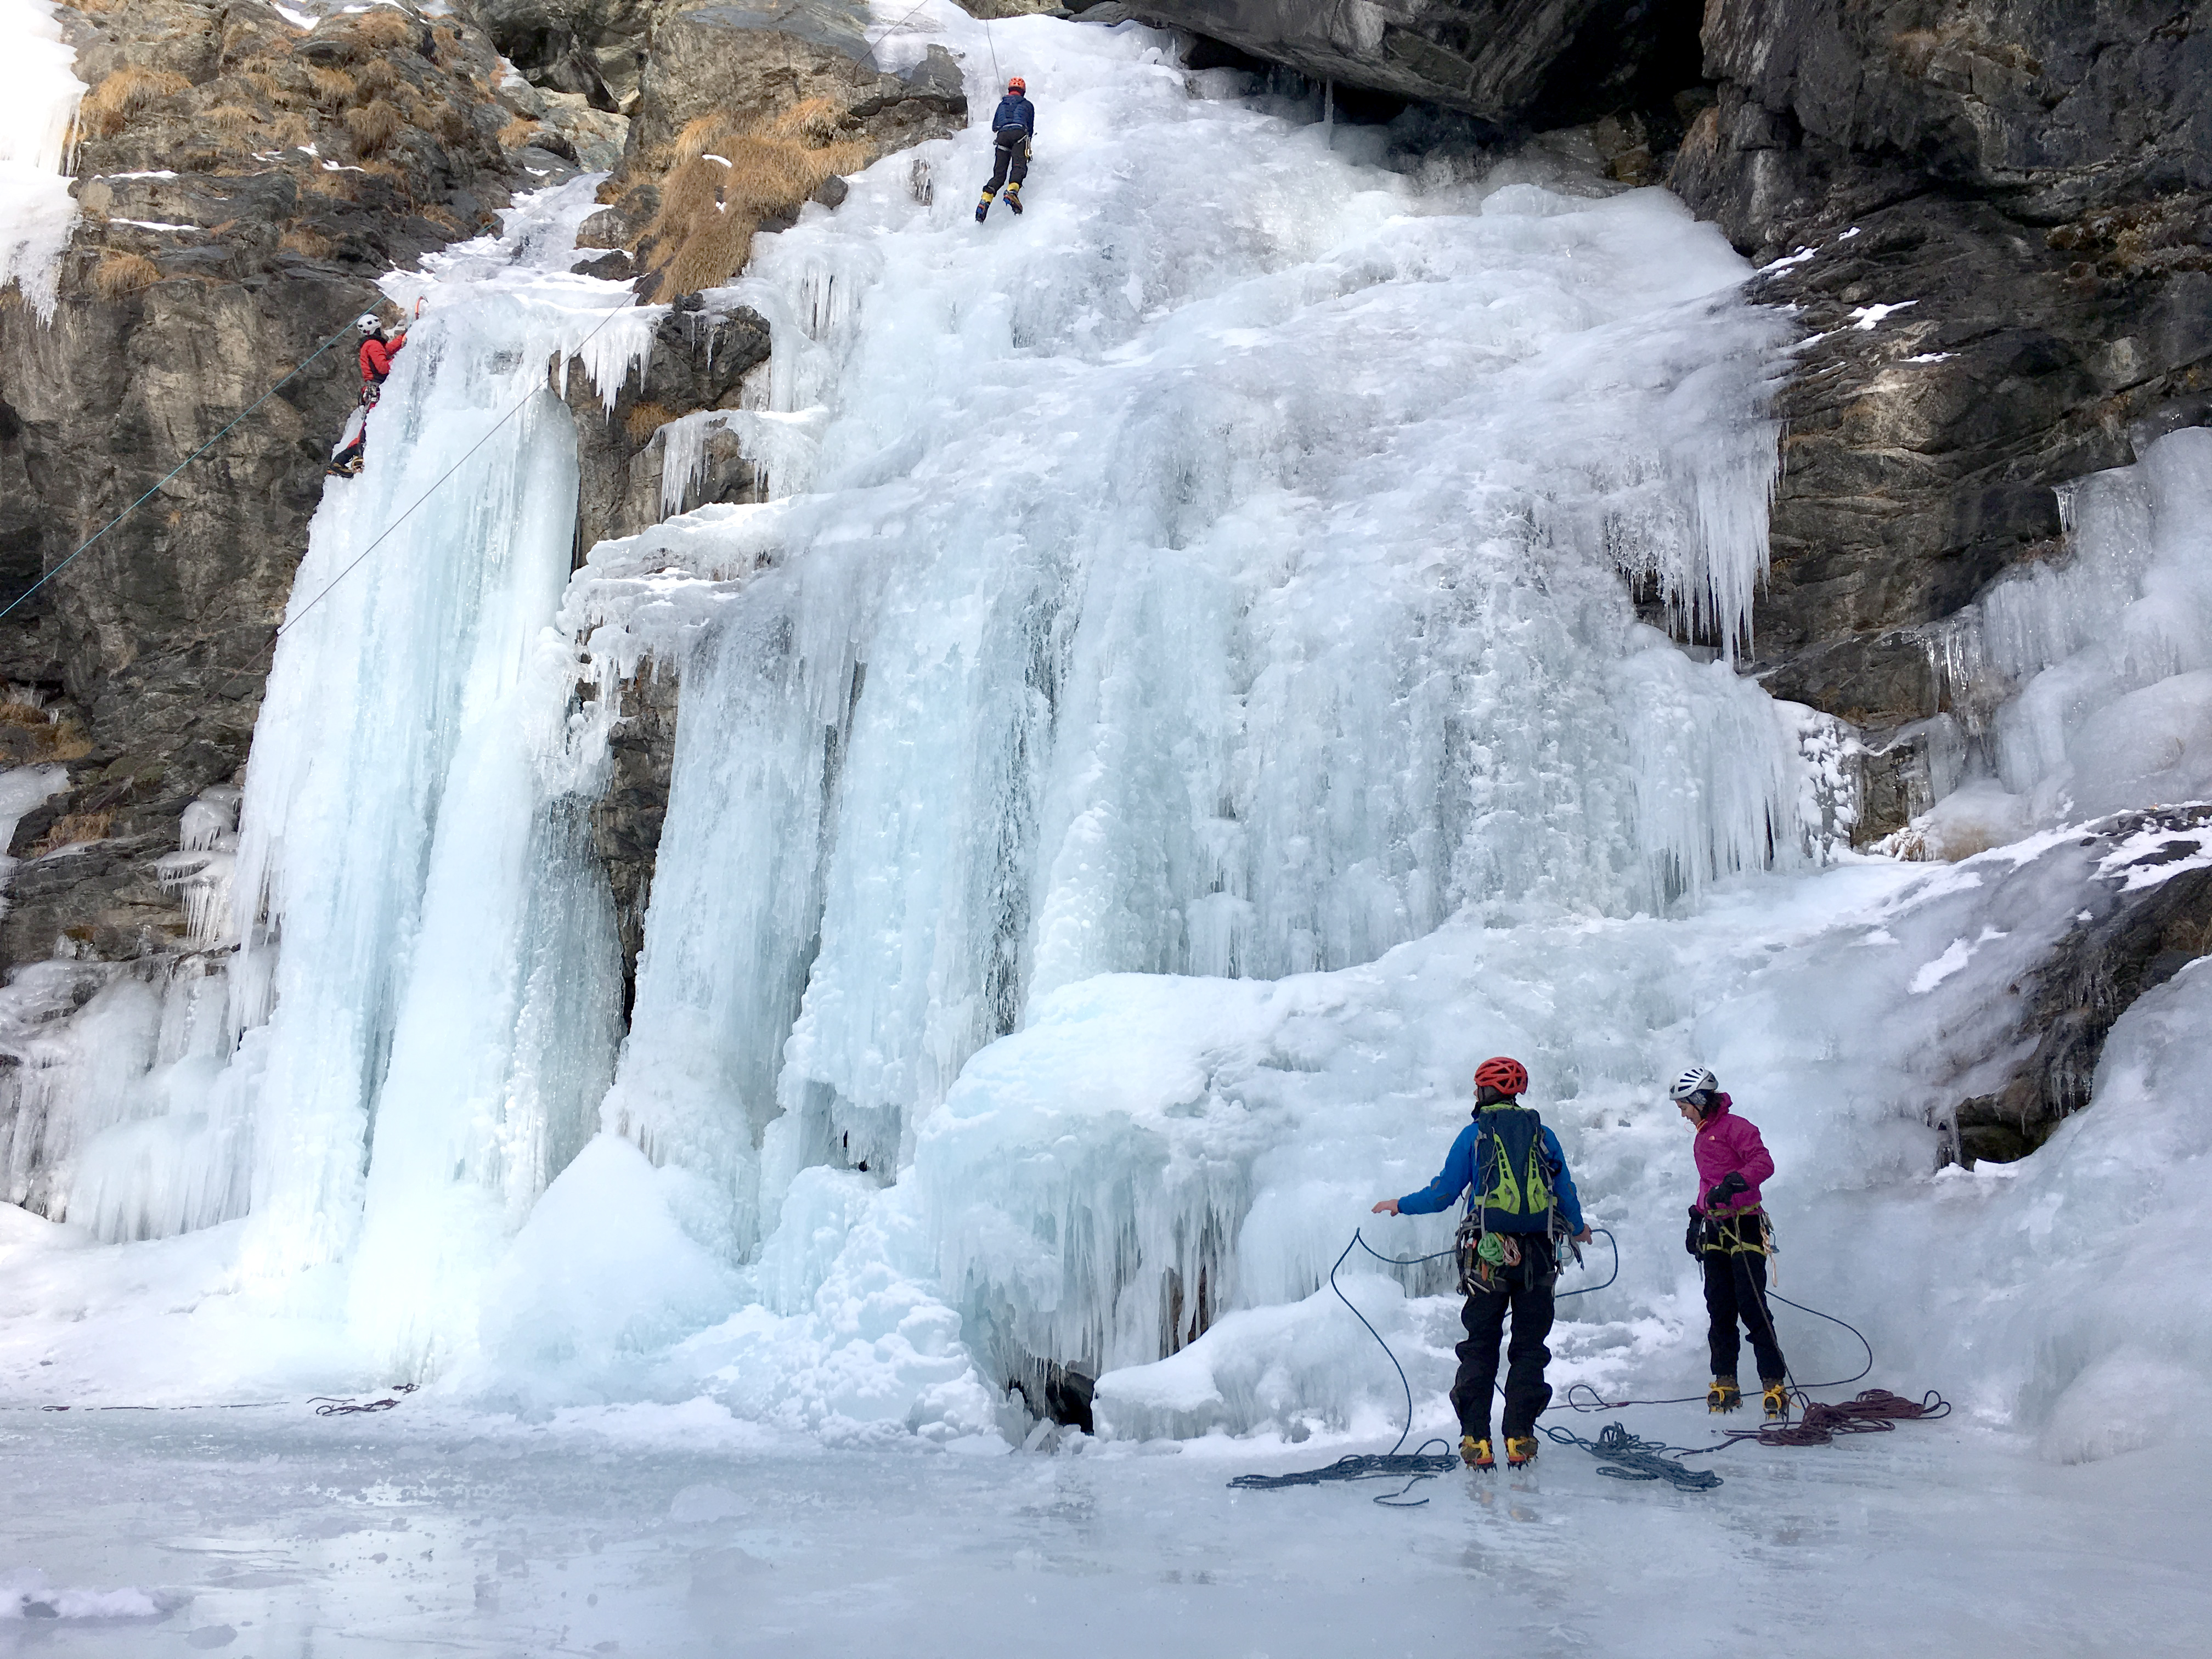 Introductory Ice Climbing